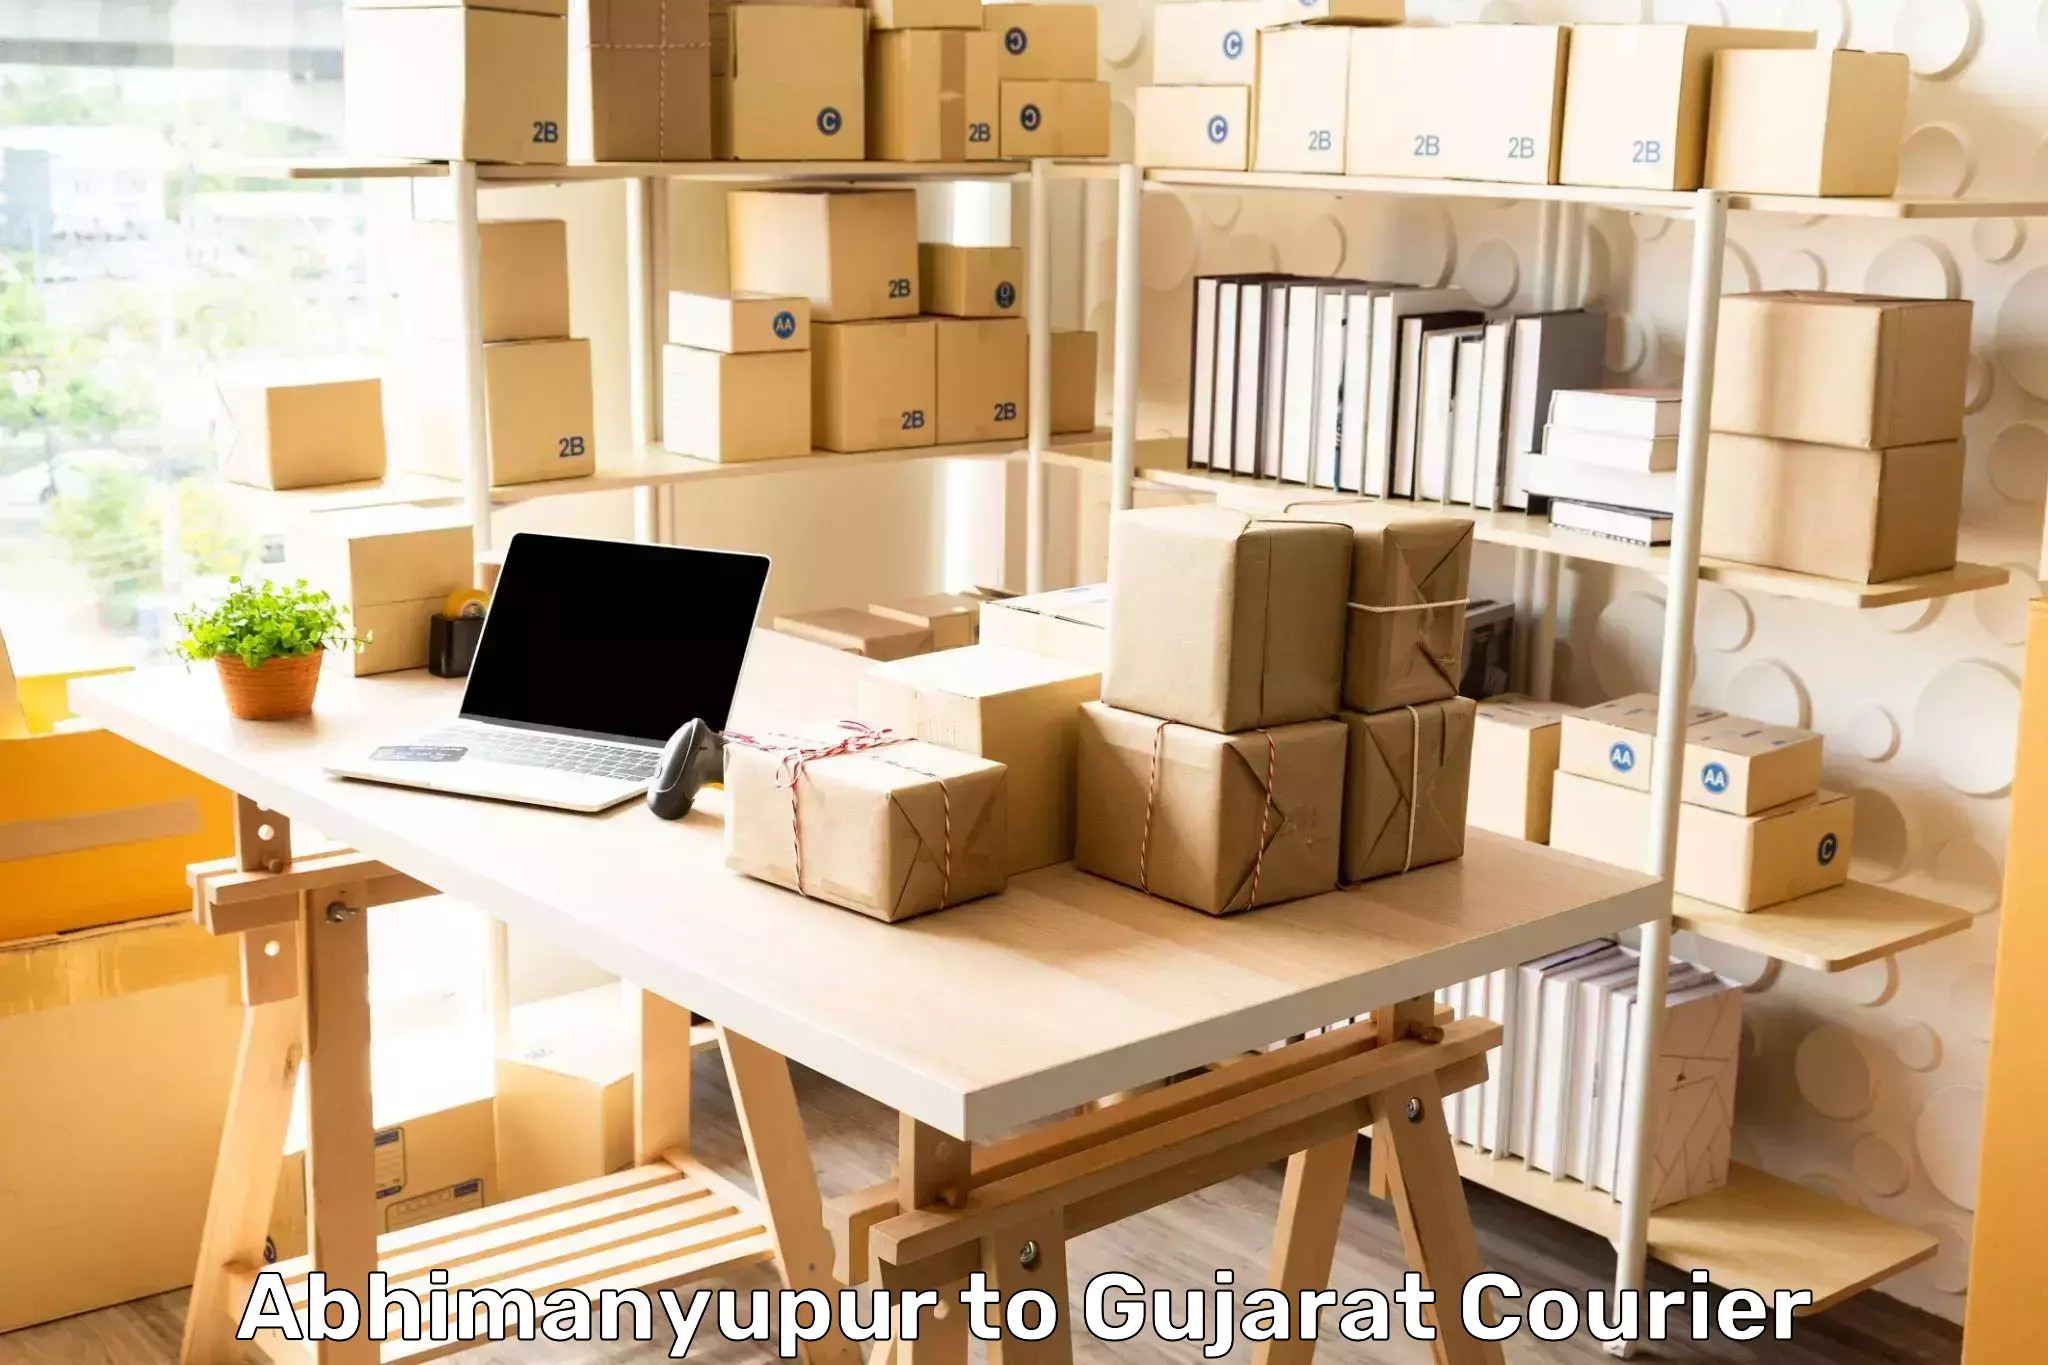 24/7 shipping services Abhimanyupur to Palanpur